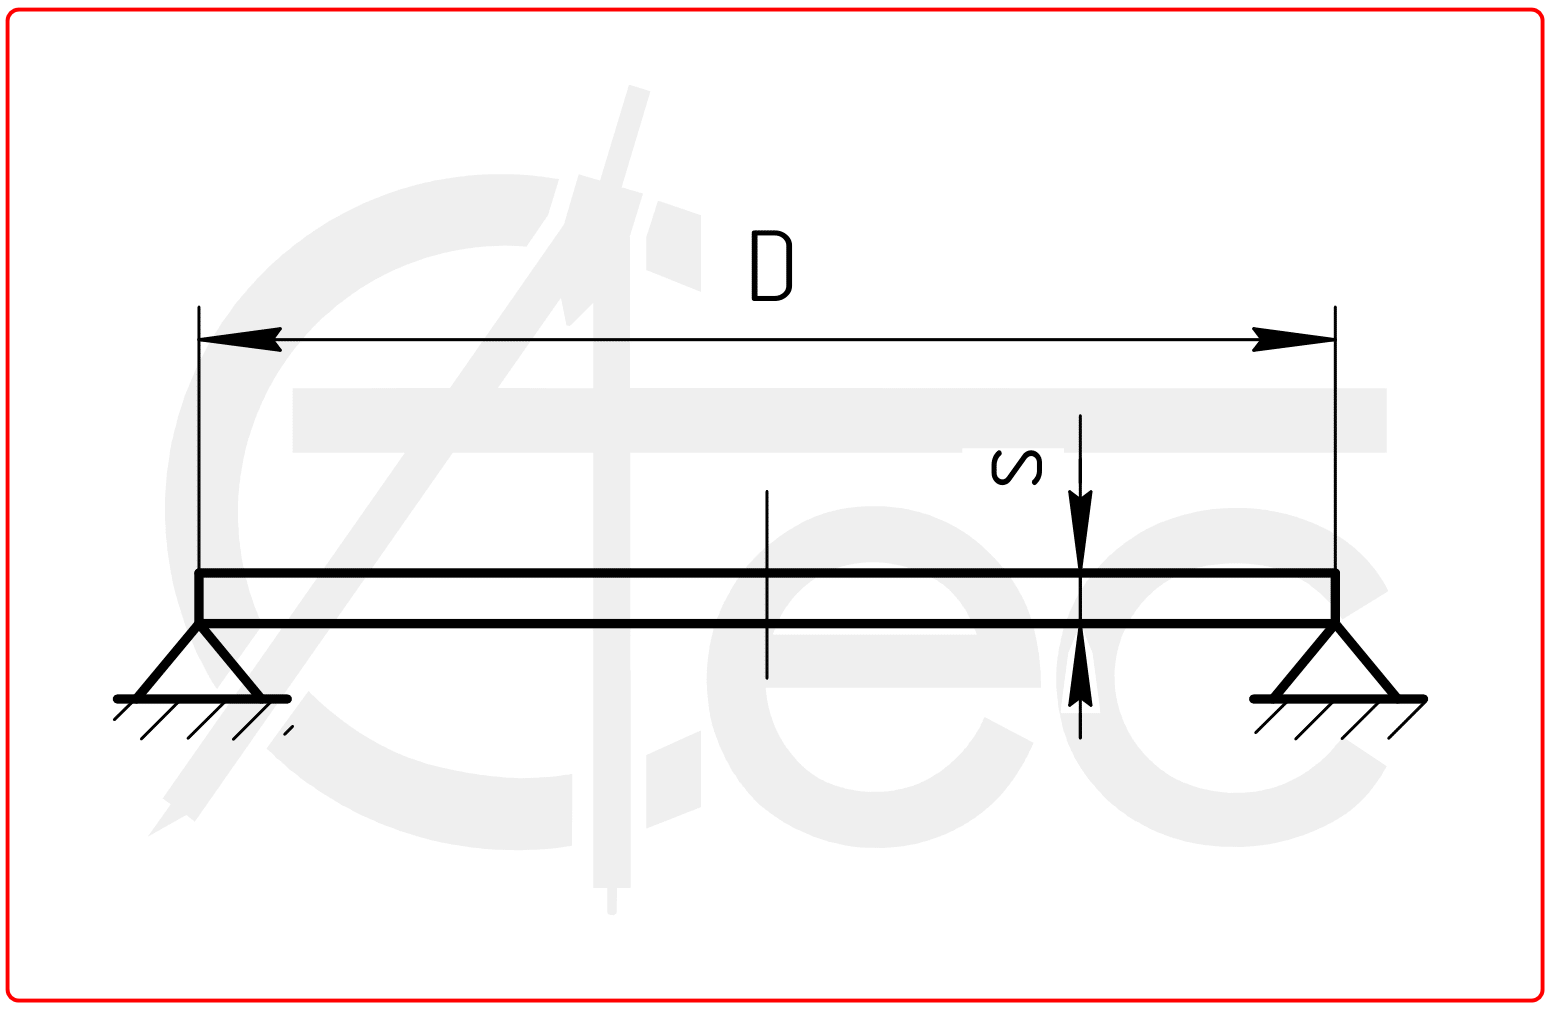 Natural frequency of circular plate with simply supported edge